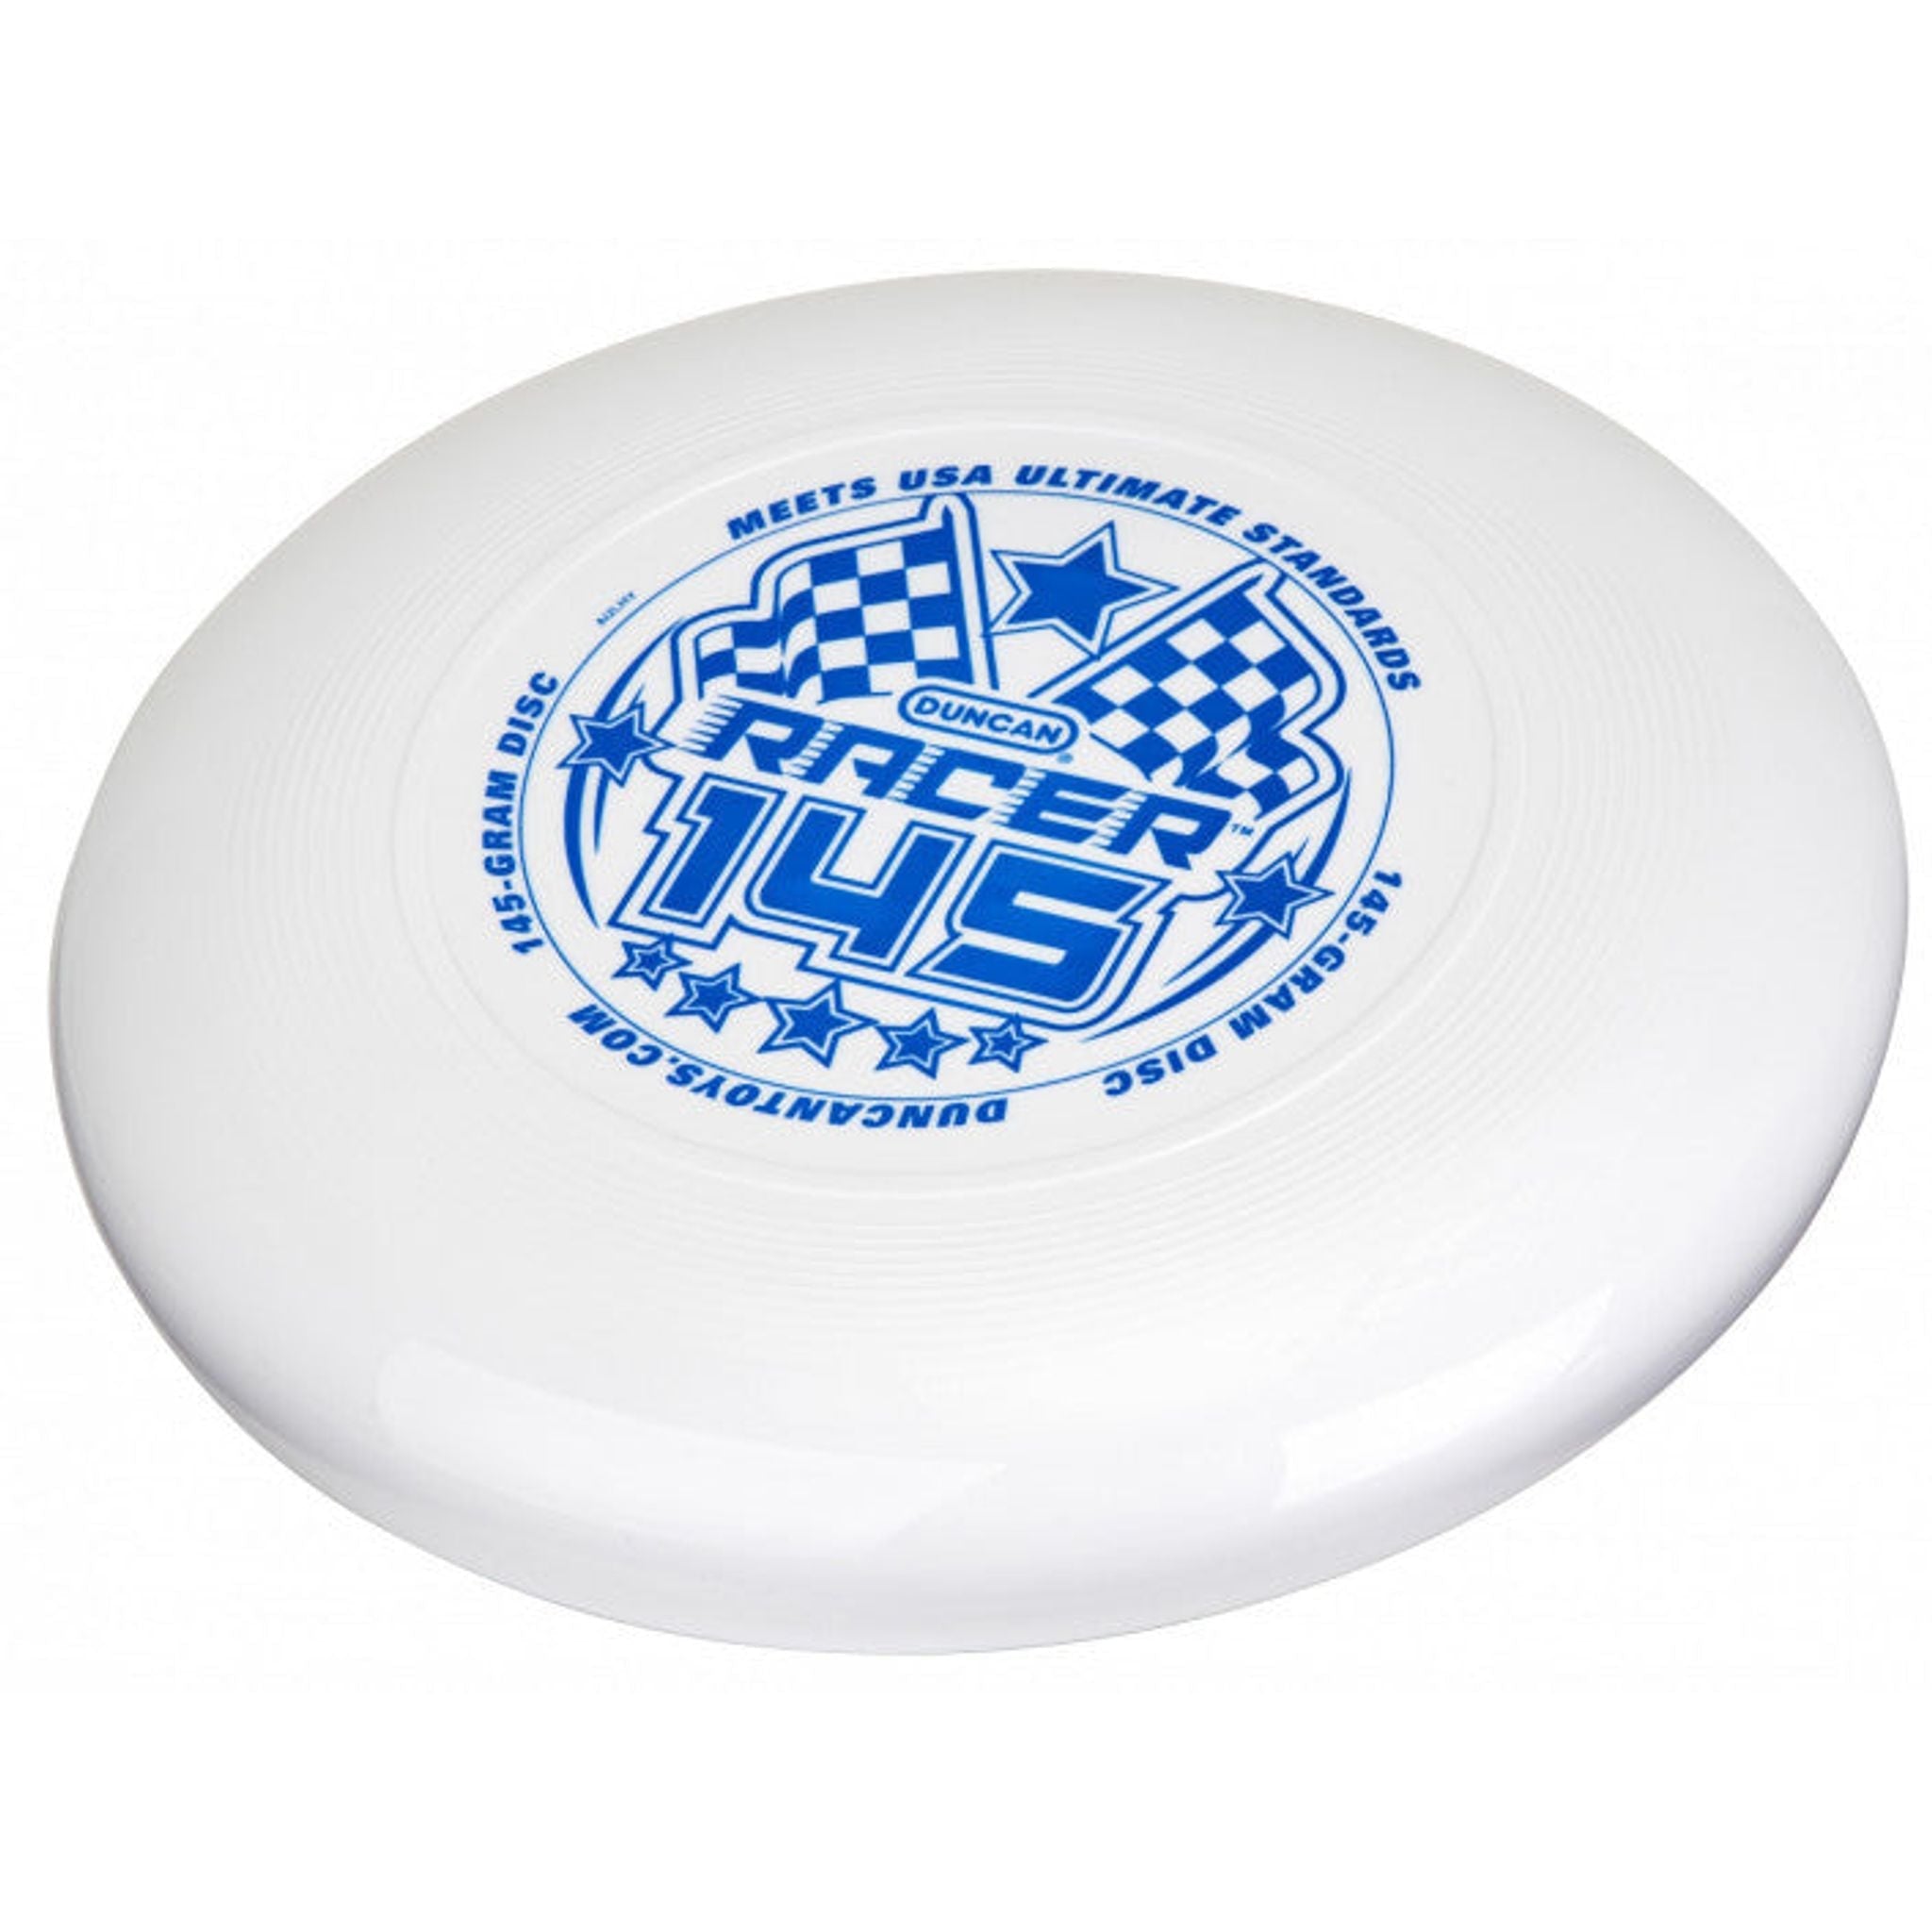 Duncan Racer 145 Frisbee - Toybox Tales